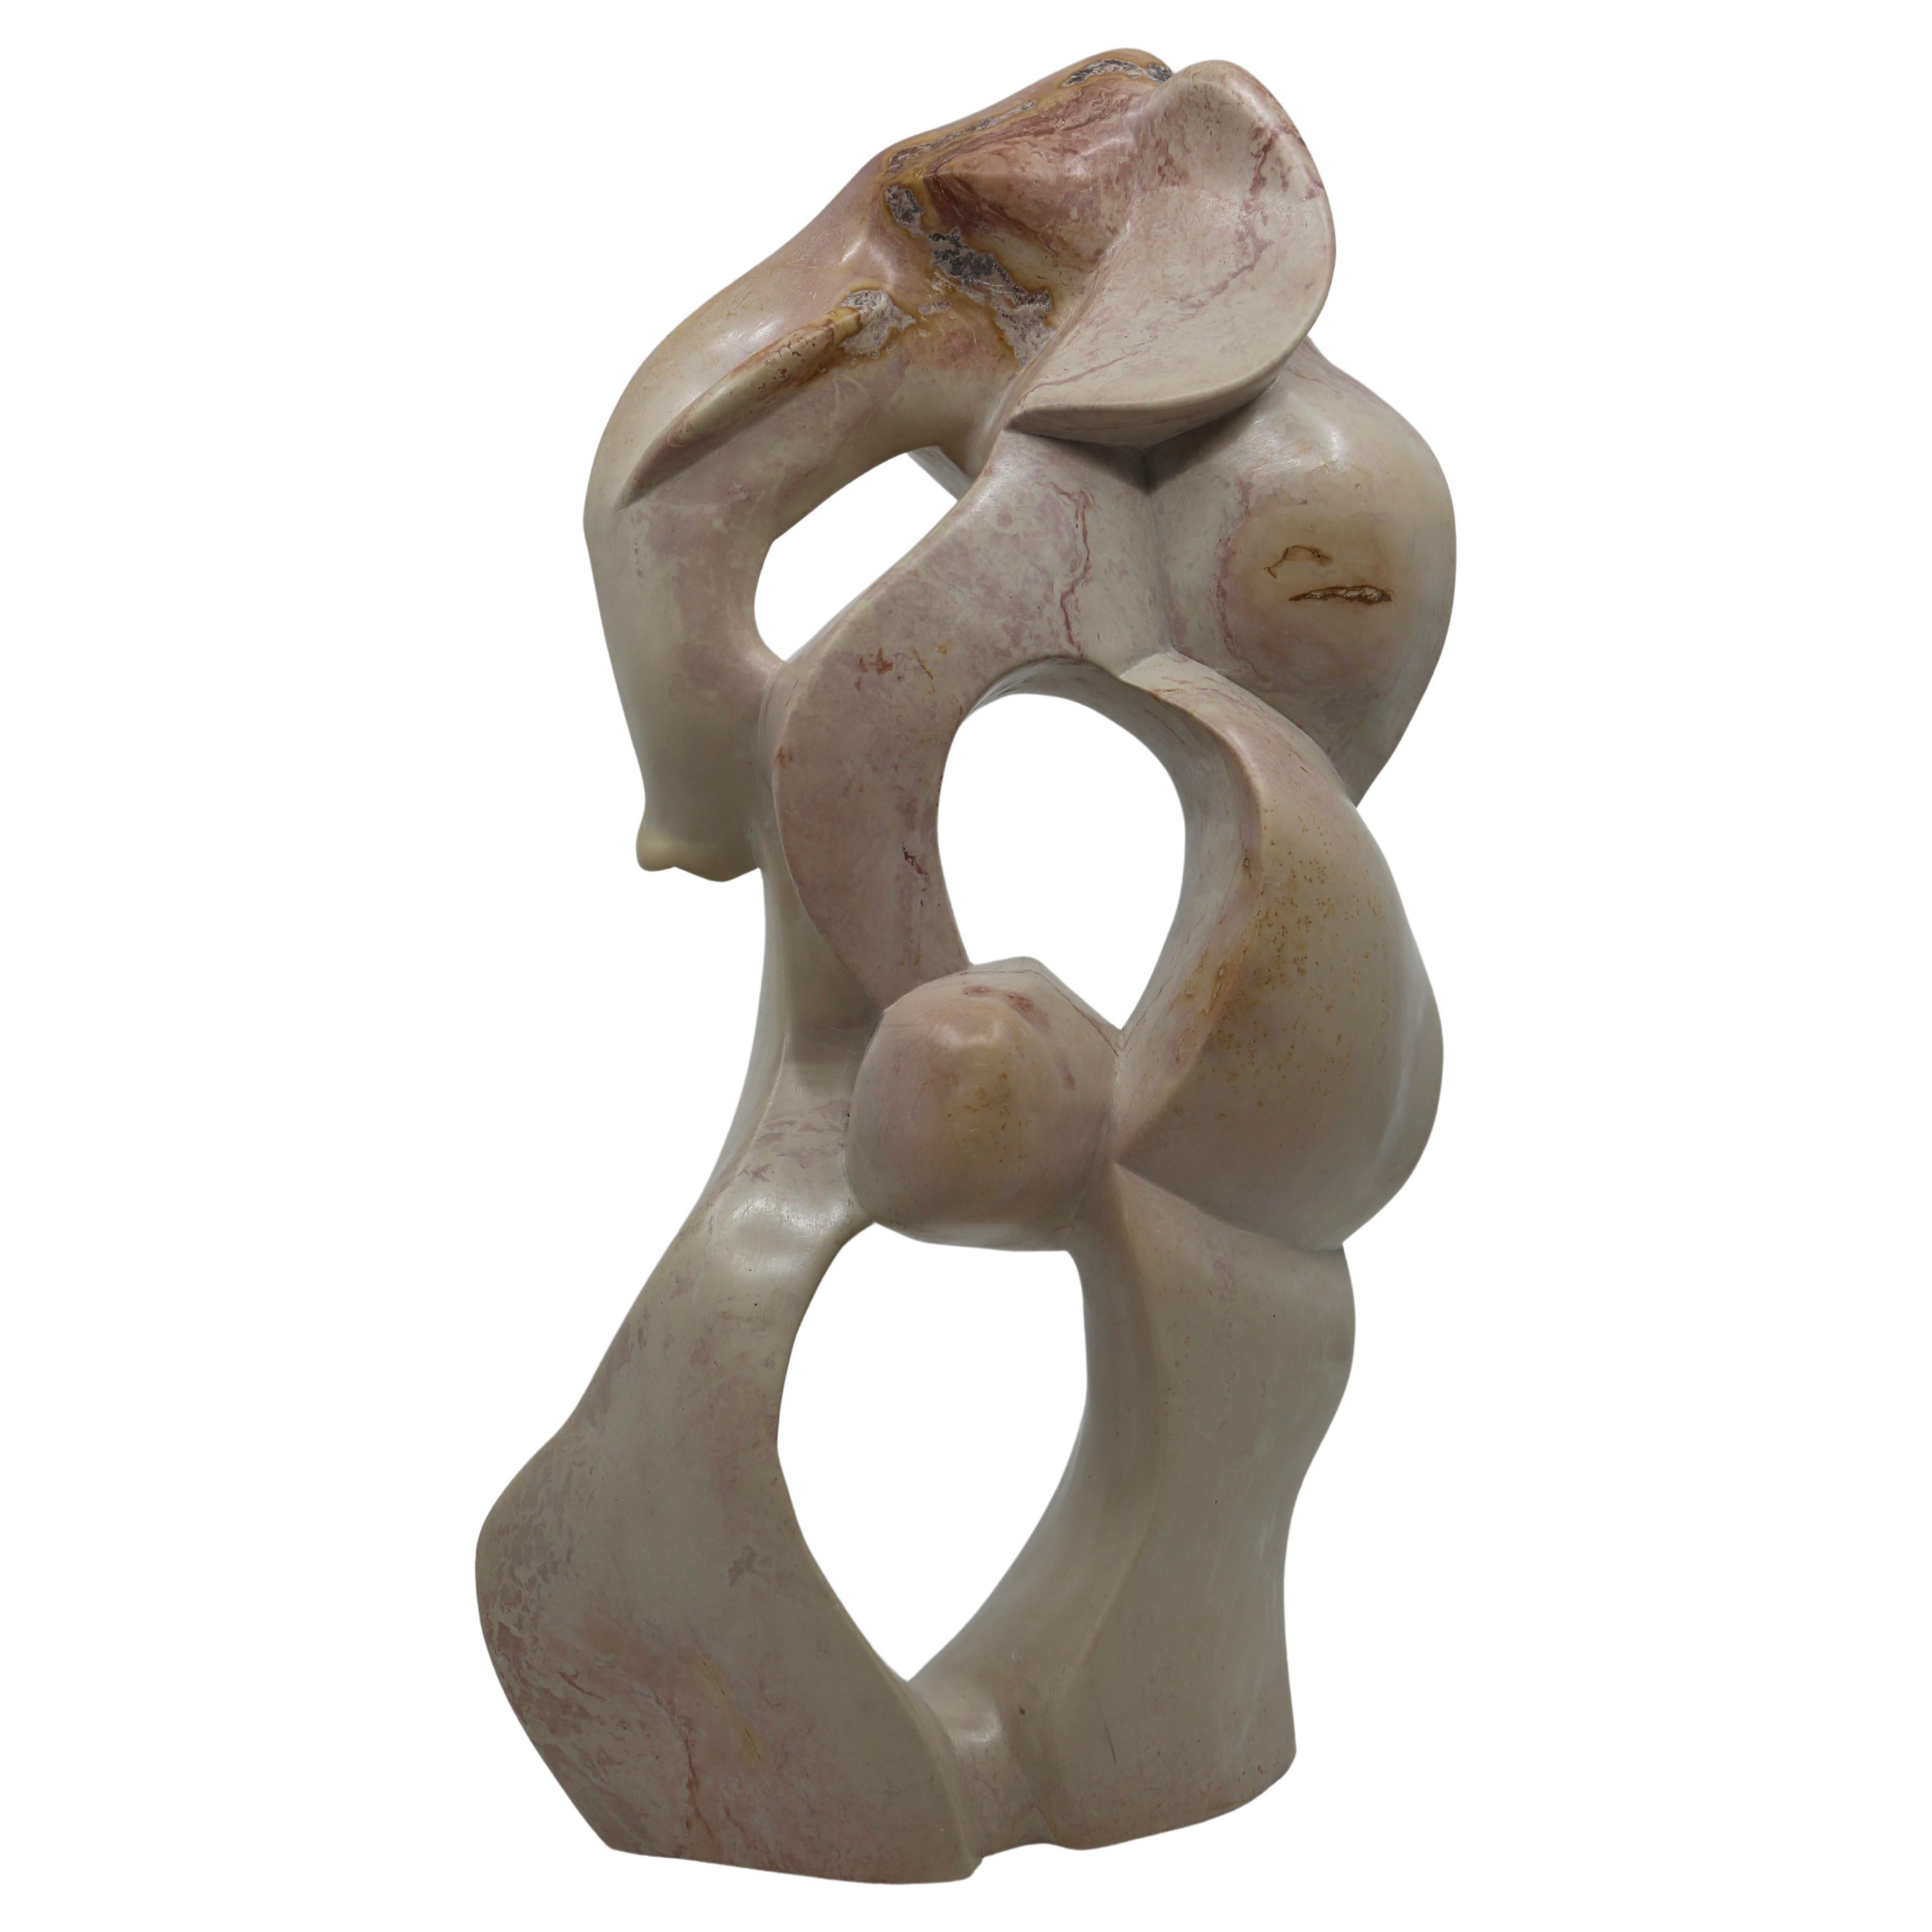 Sculpted Elephant in Polished Pink and Beige Marble